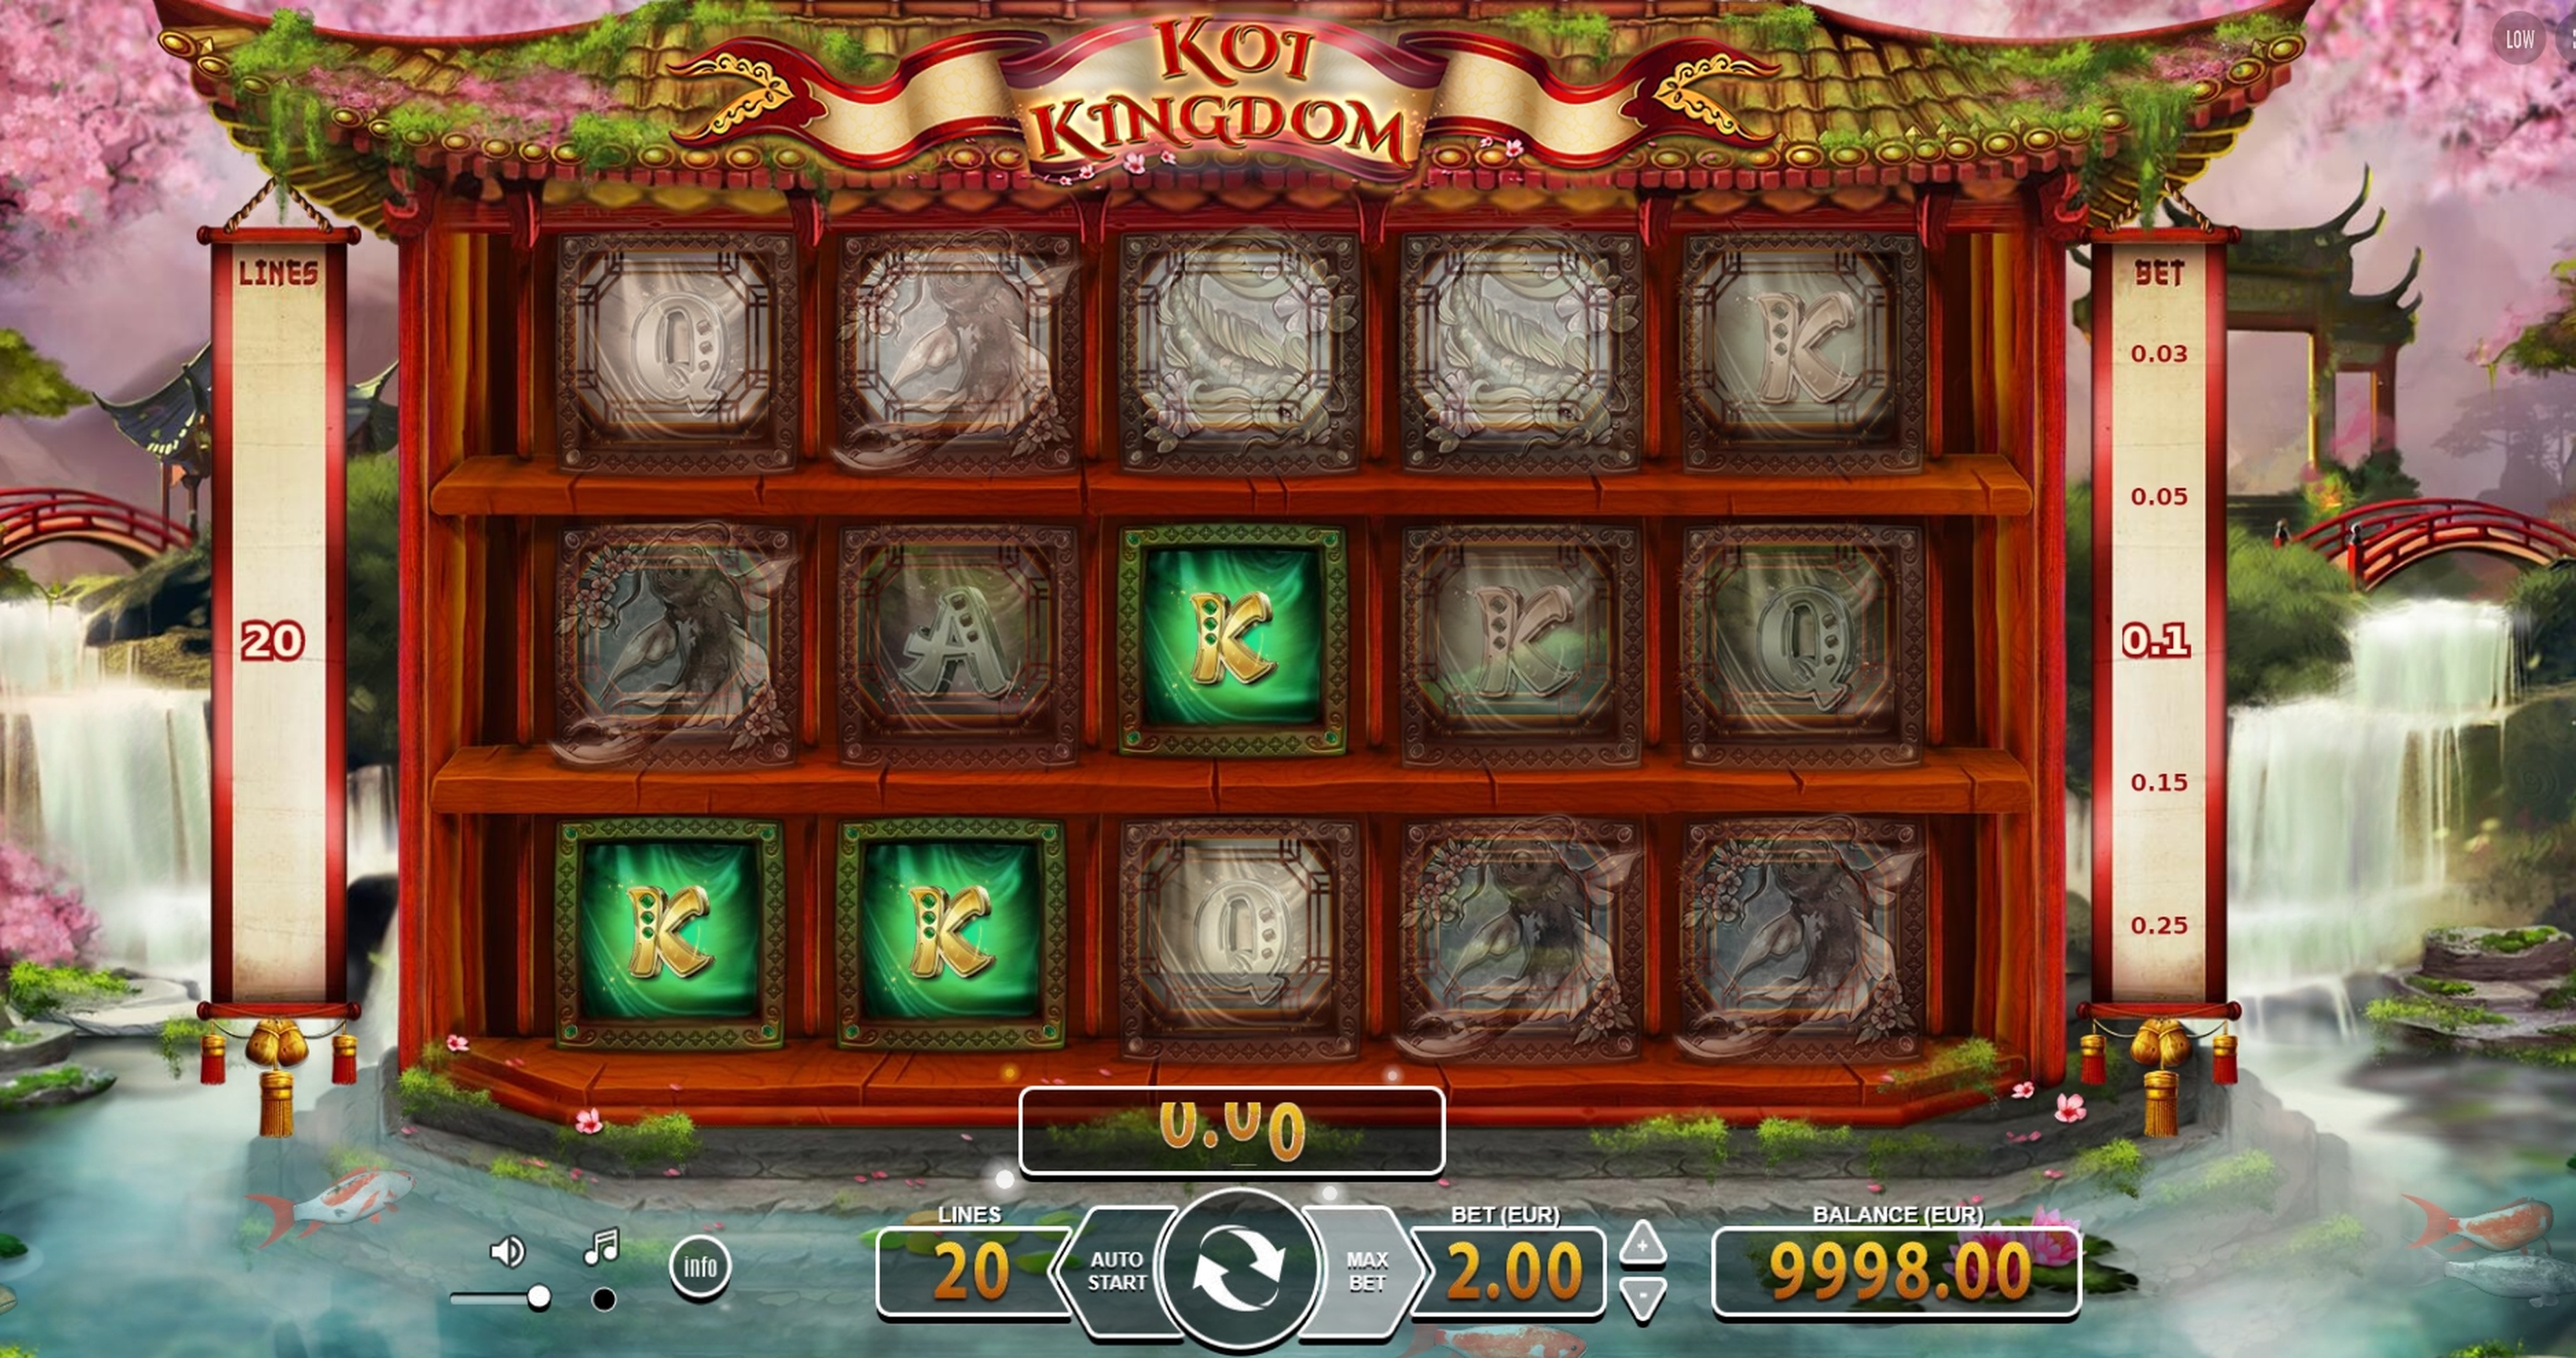 Win Money in Koi Kingdom Free Slot Game by BF Games